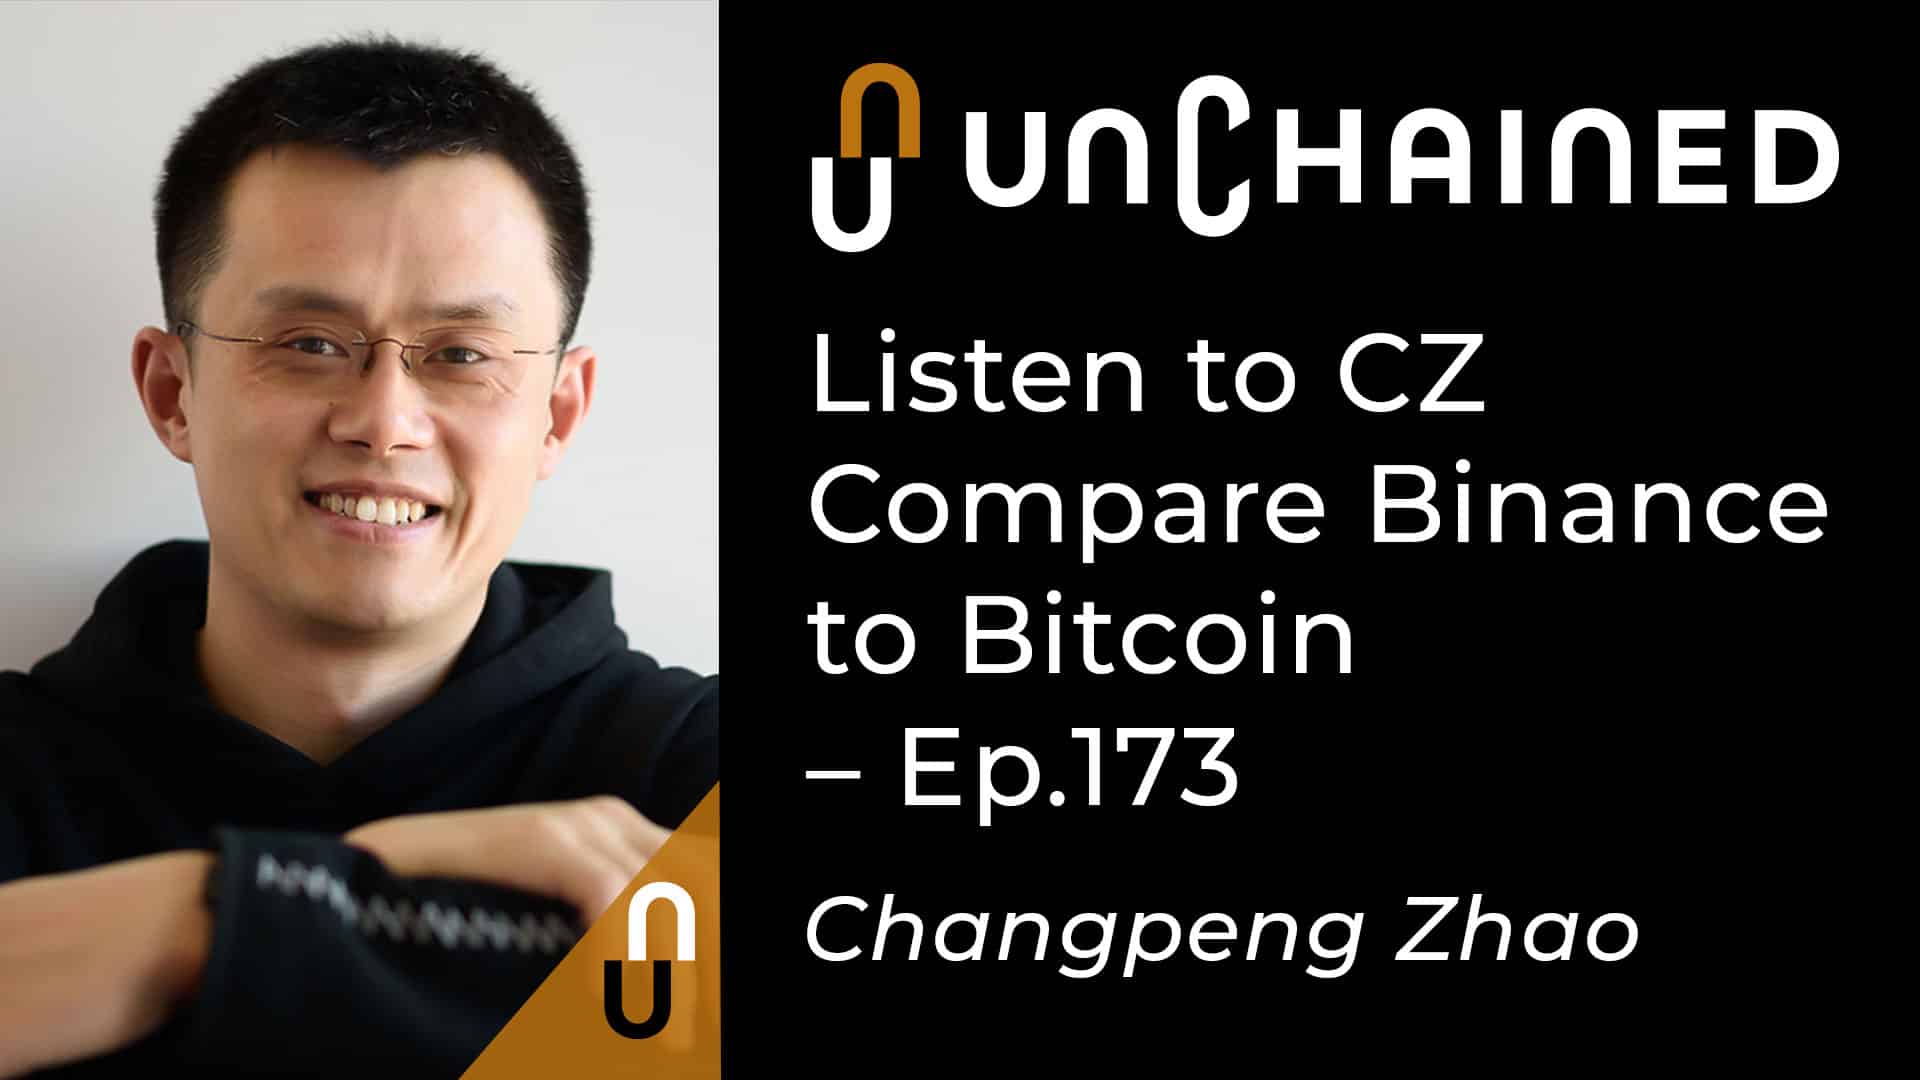 Listen to CZ Compare Binance to Bitcoin - Unchained Podcast